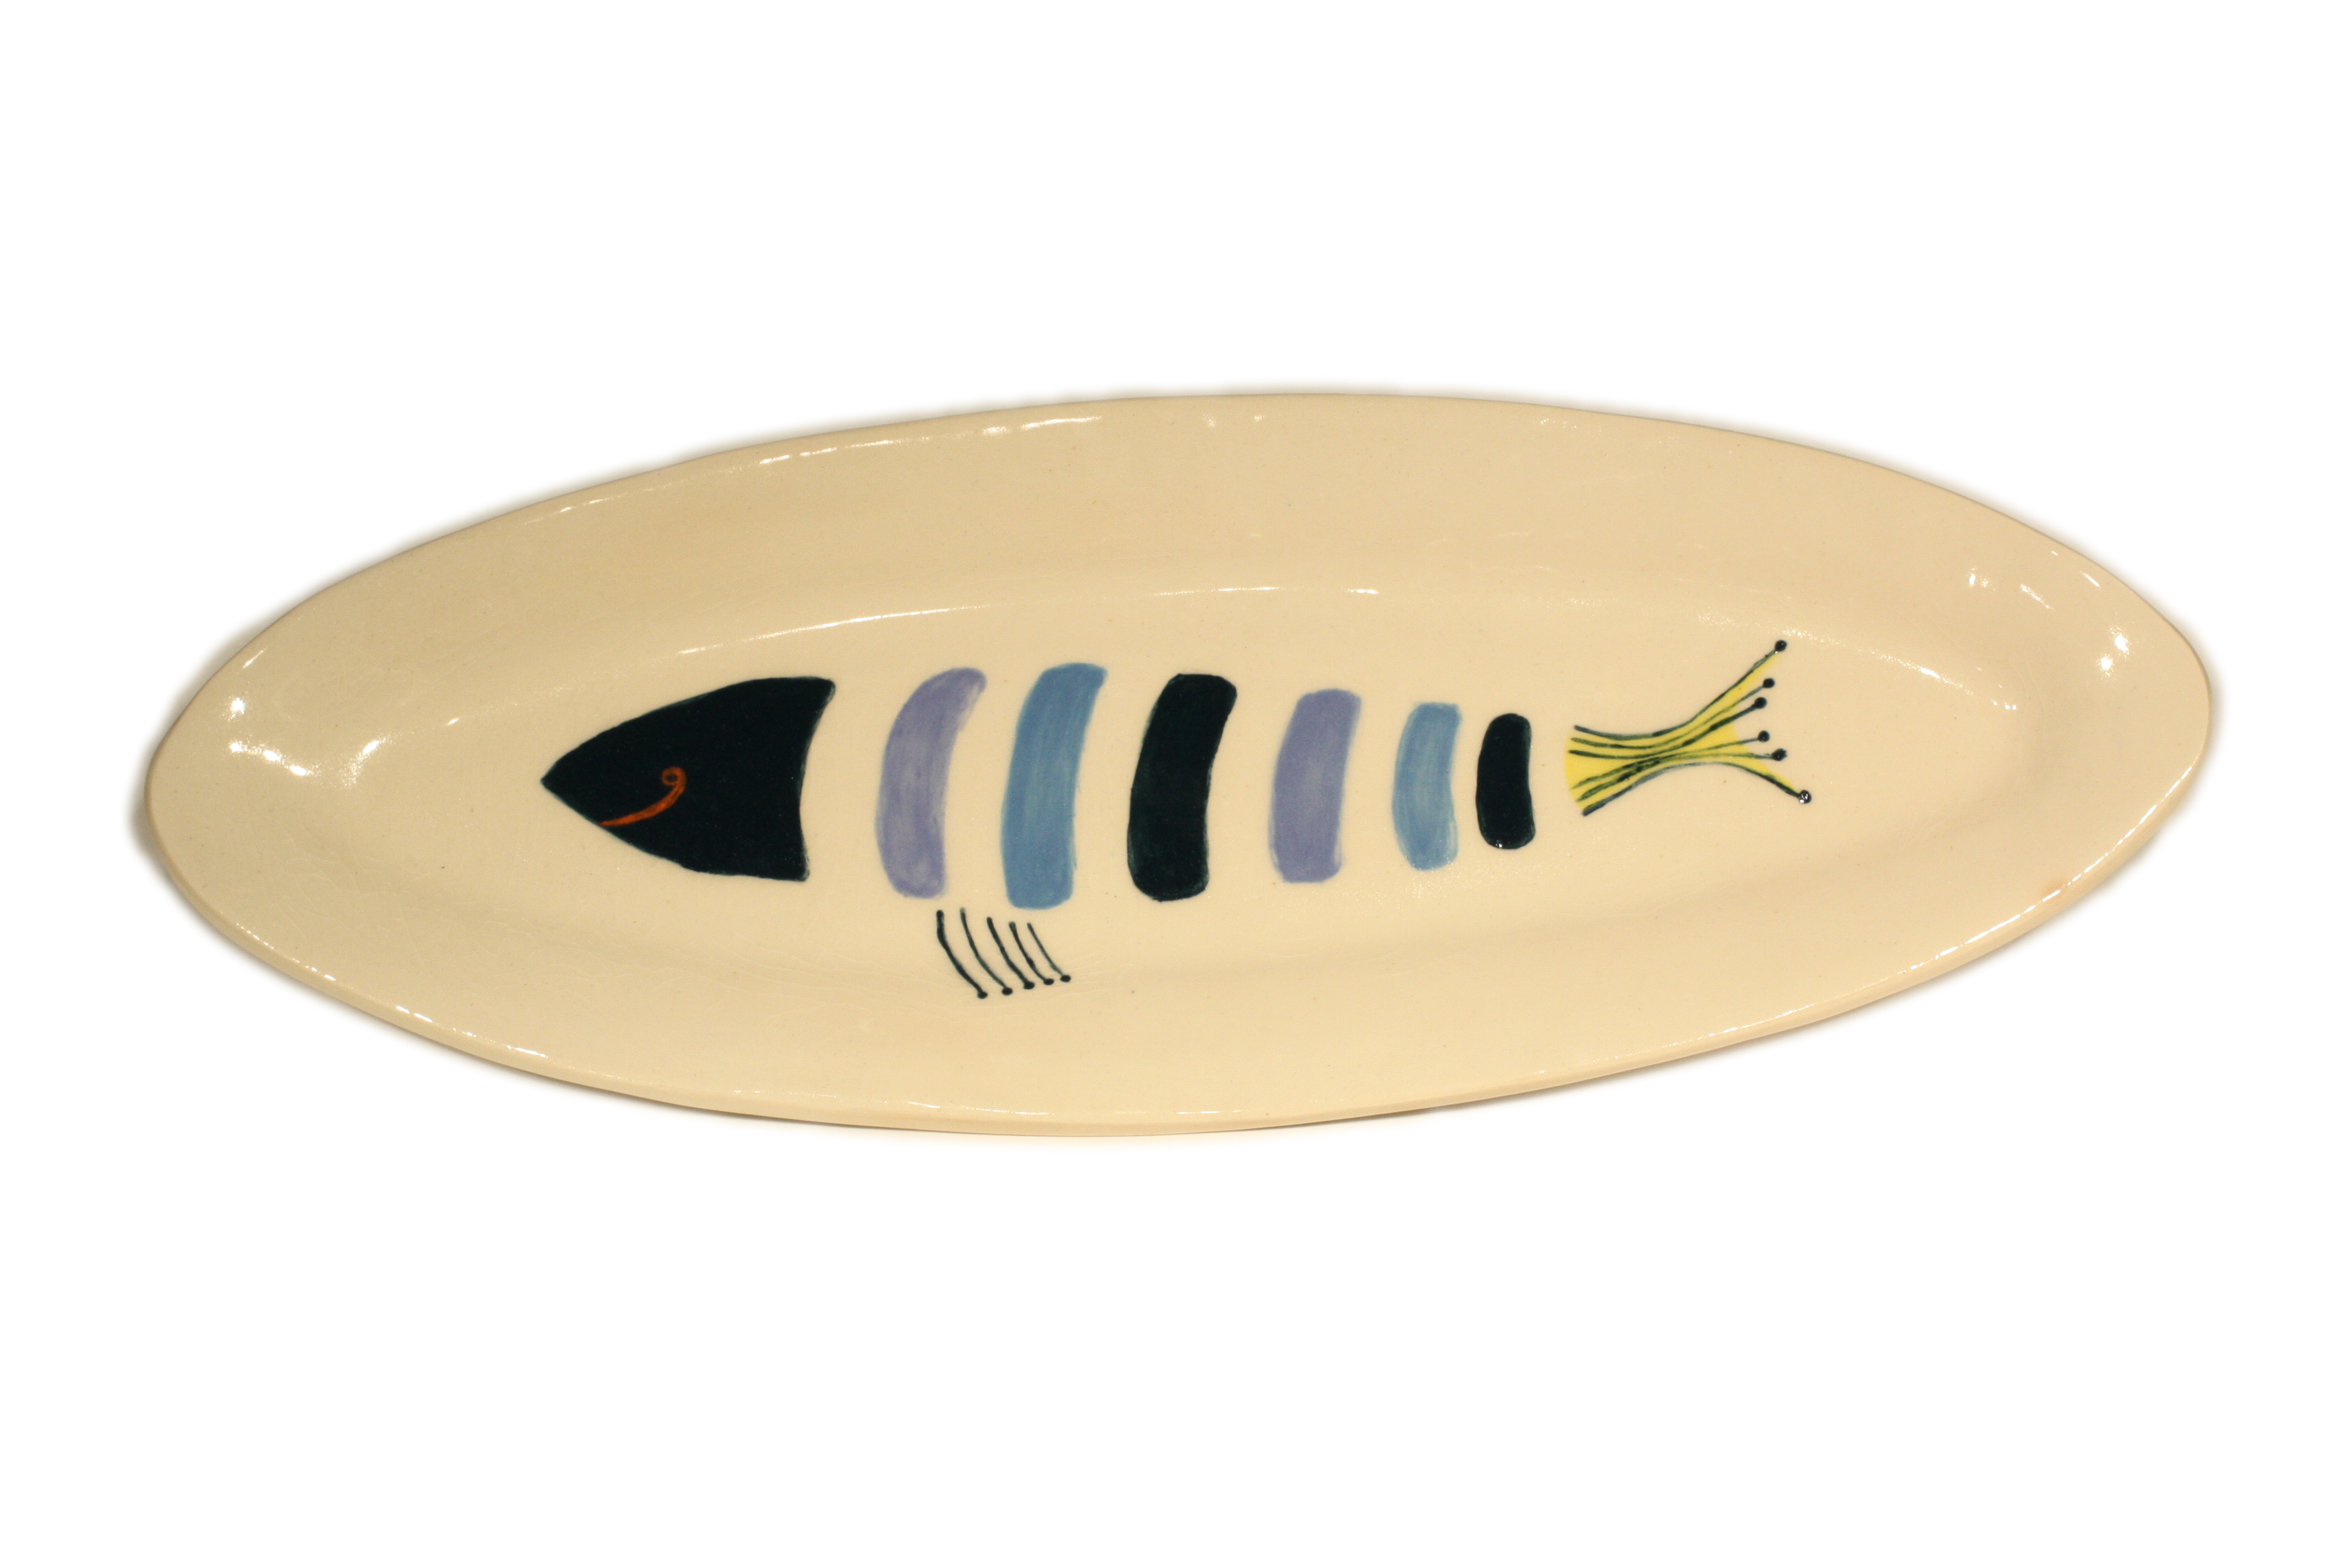 Ceramic serving platter with blue striped fish